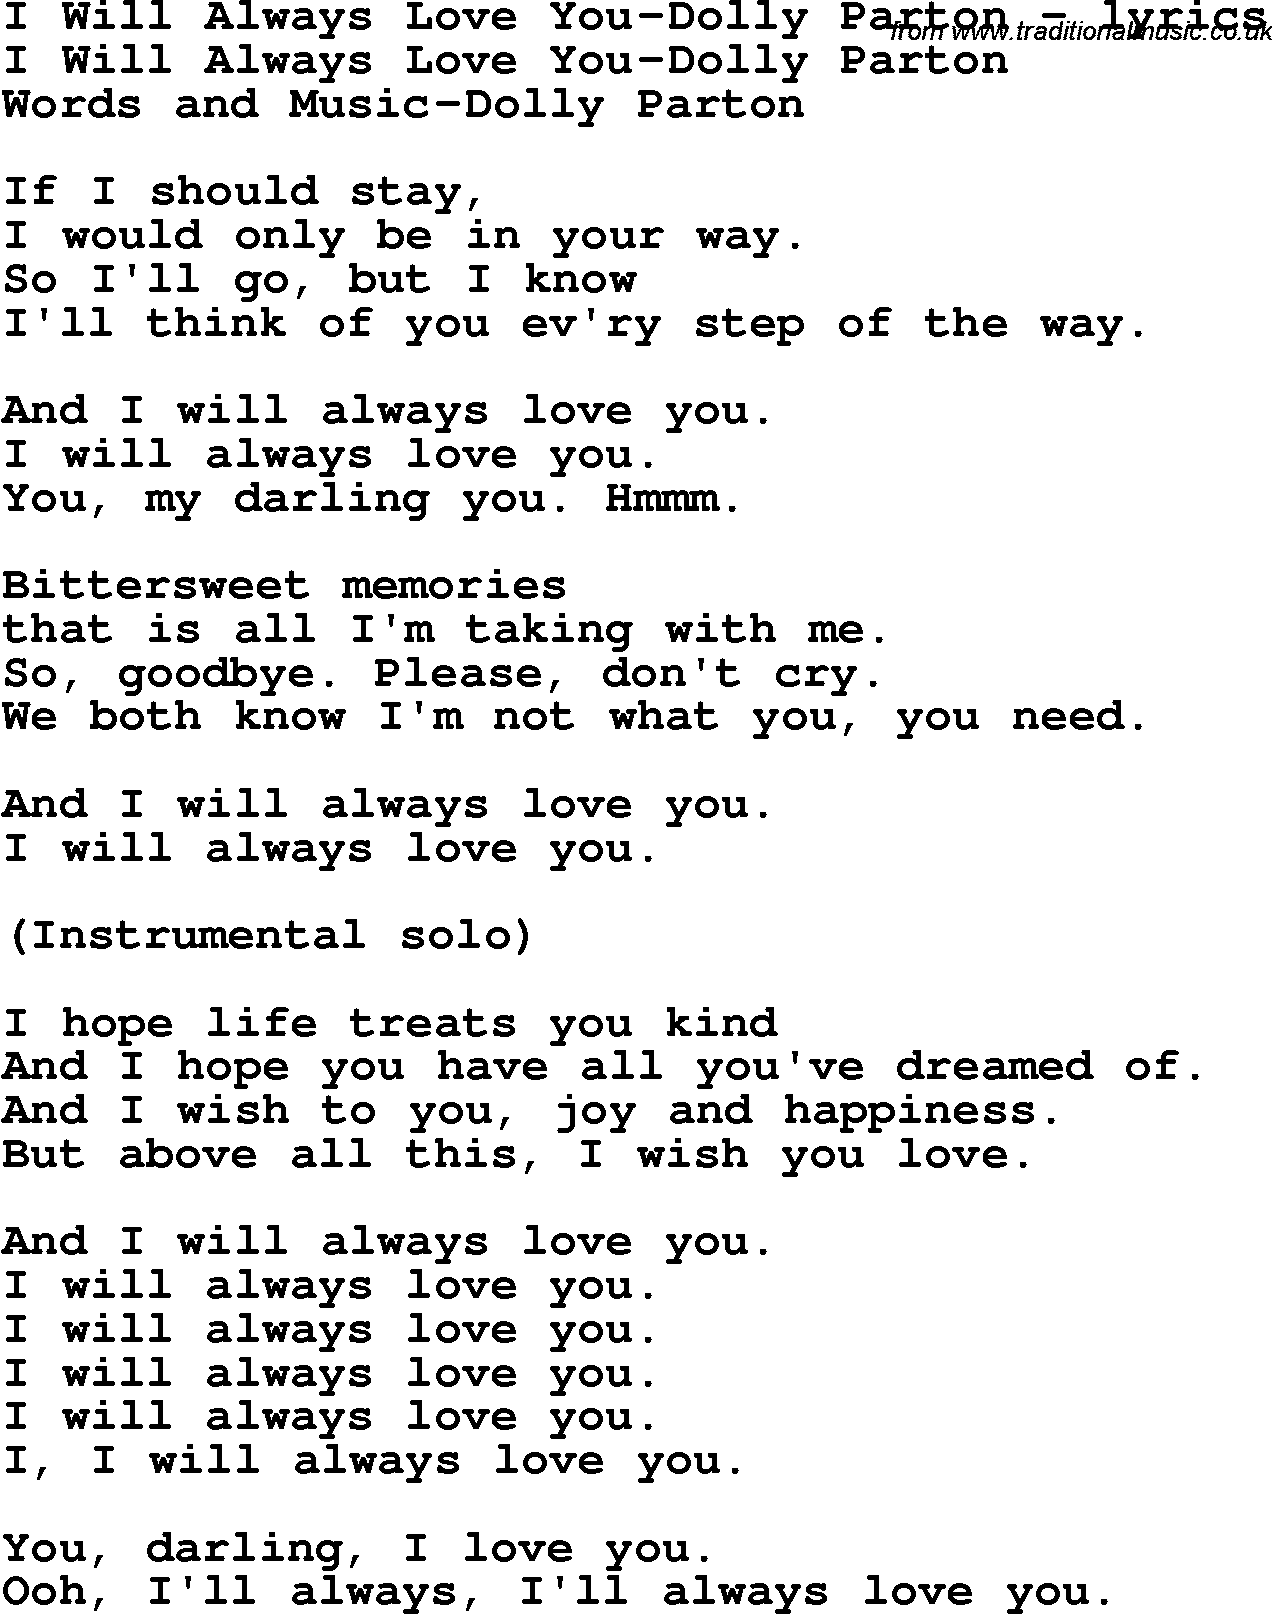 Love Song Lyrics For I Will Always Love You Dolly Parton G em c dlove you, you, i, will always love you. traditional music library